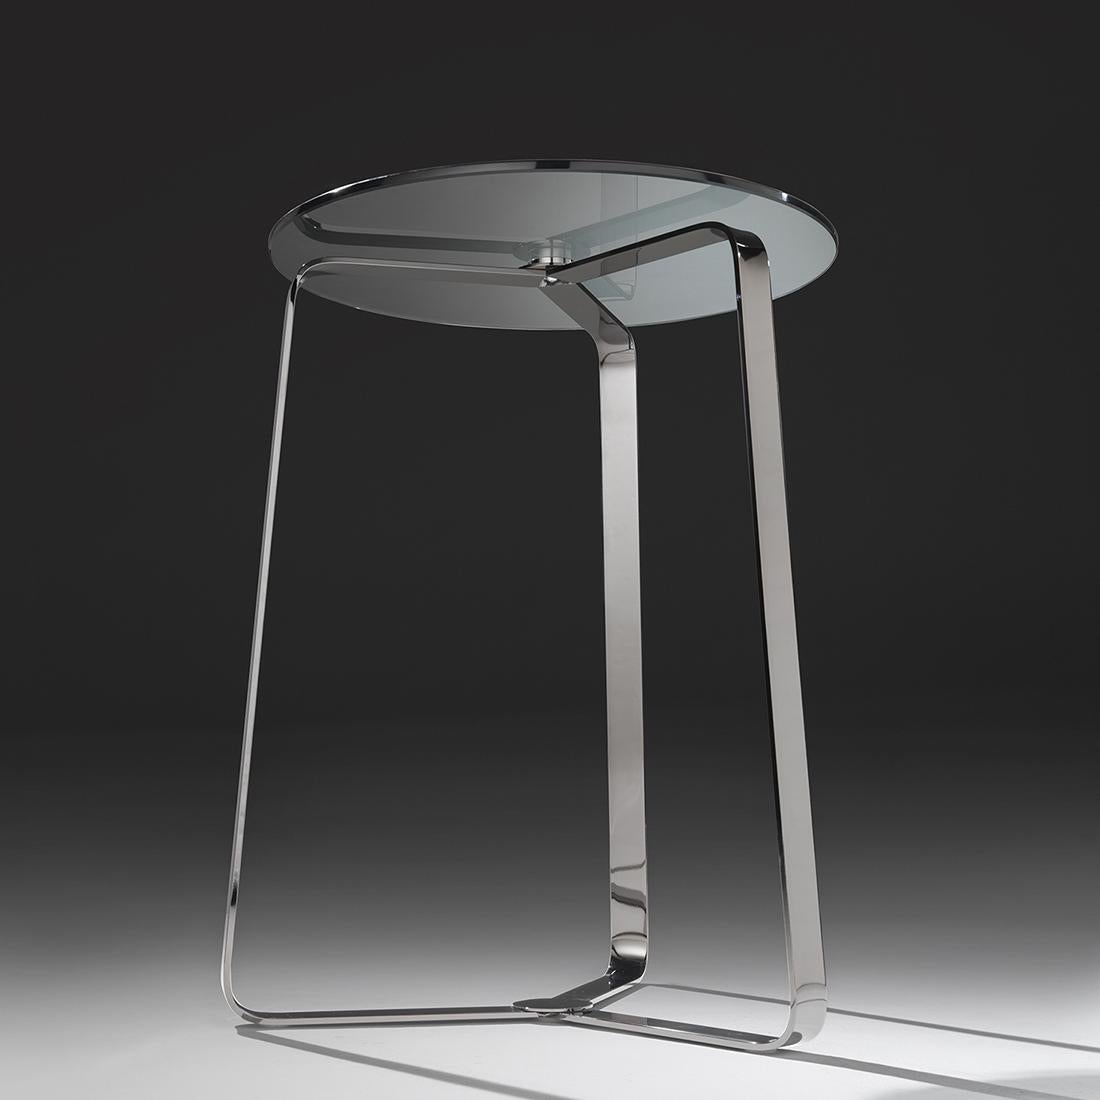 Side table triple feet with structure in polished
chrome steel. With grey tempered tinted glass top,
Measures 8mm thickness.
Also available with bronzed tinted glass top.